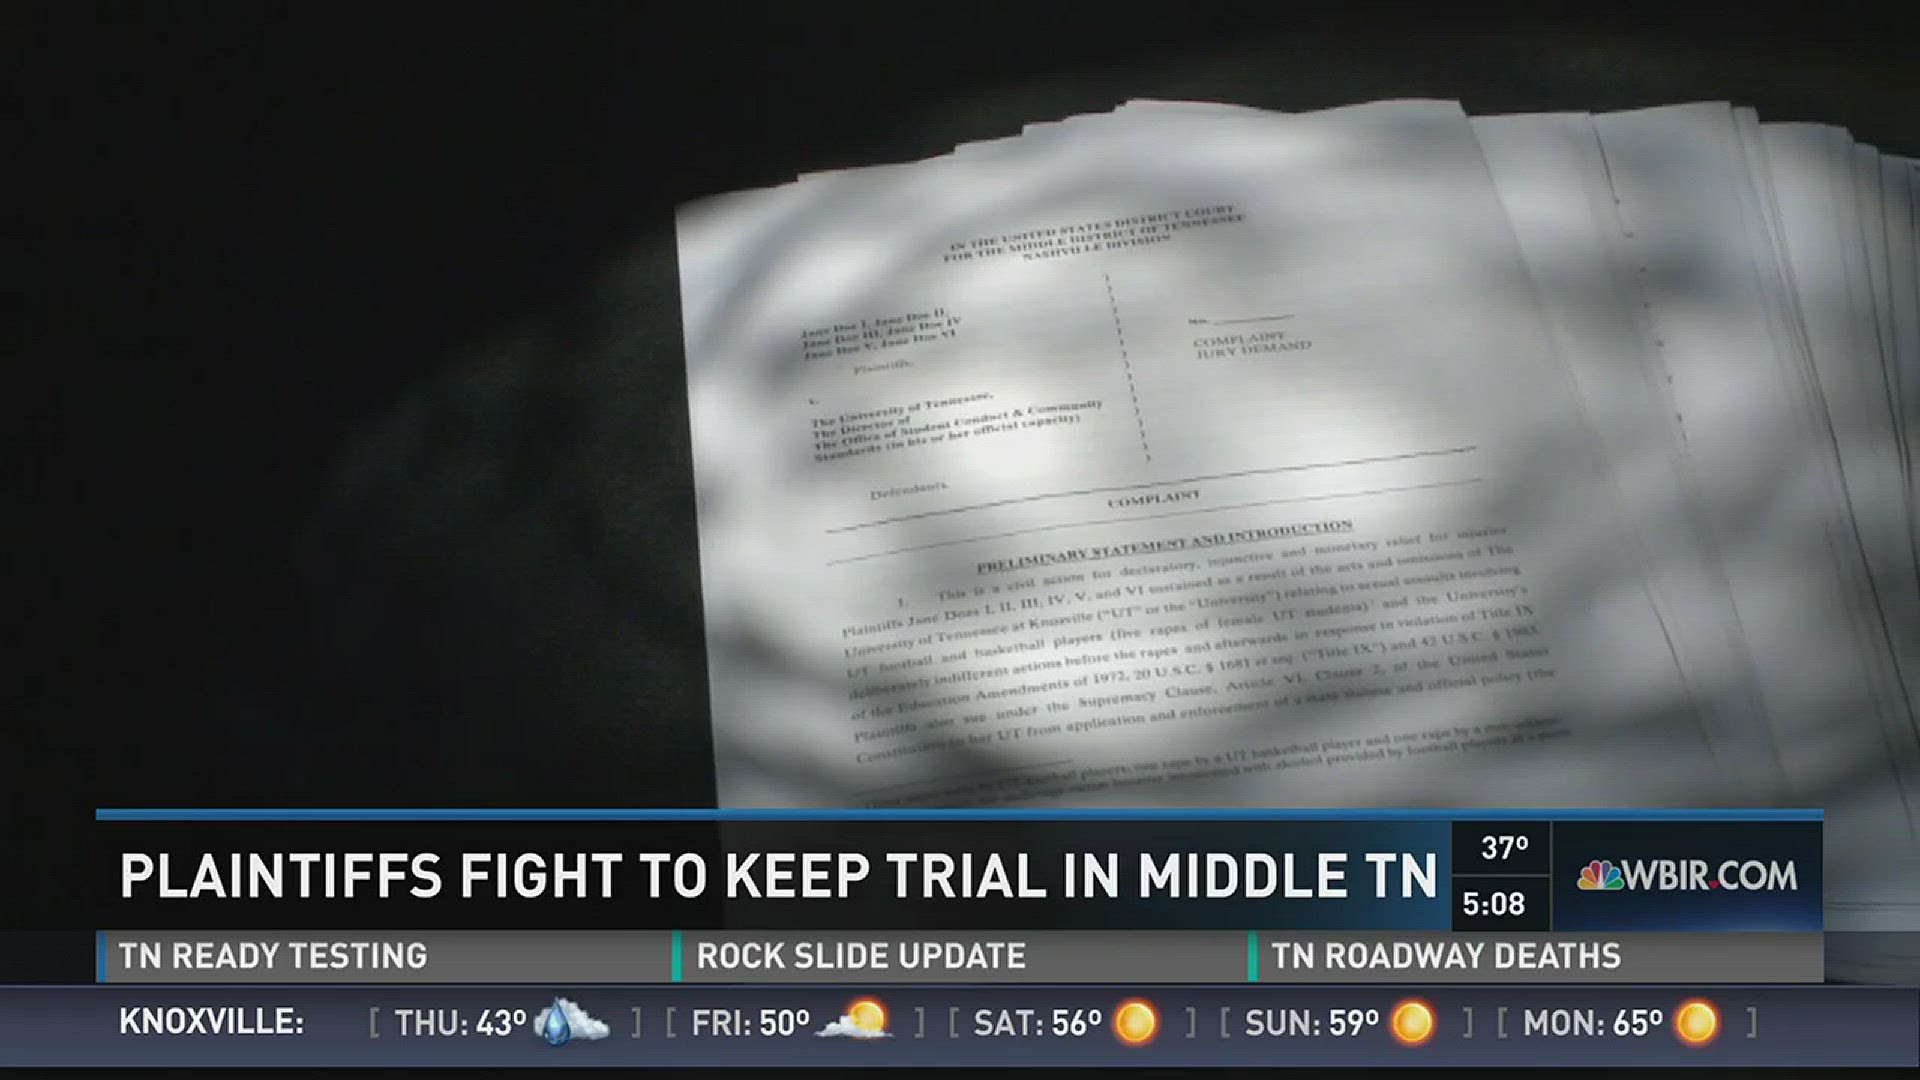 Plaintiffs in the gender discrimination lawsuit against the University of Tennessee filed a motion Tuesday asking a Middle Tennessee federal judge to keep the case in Nashville.